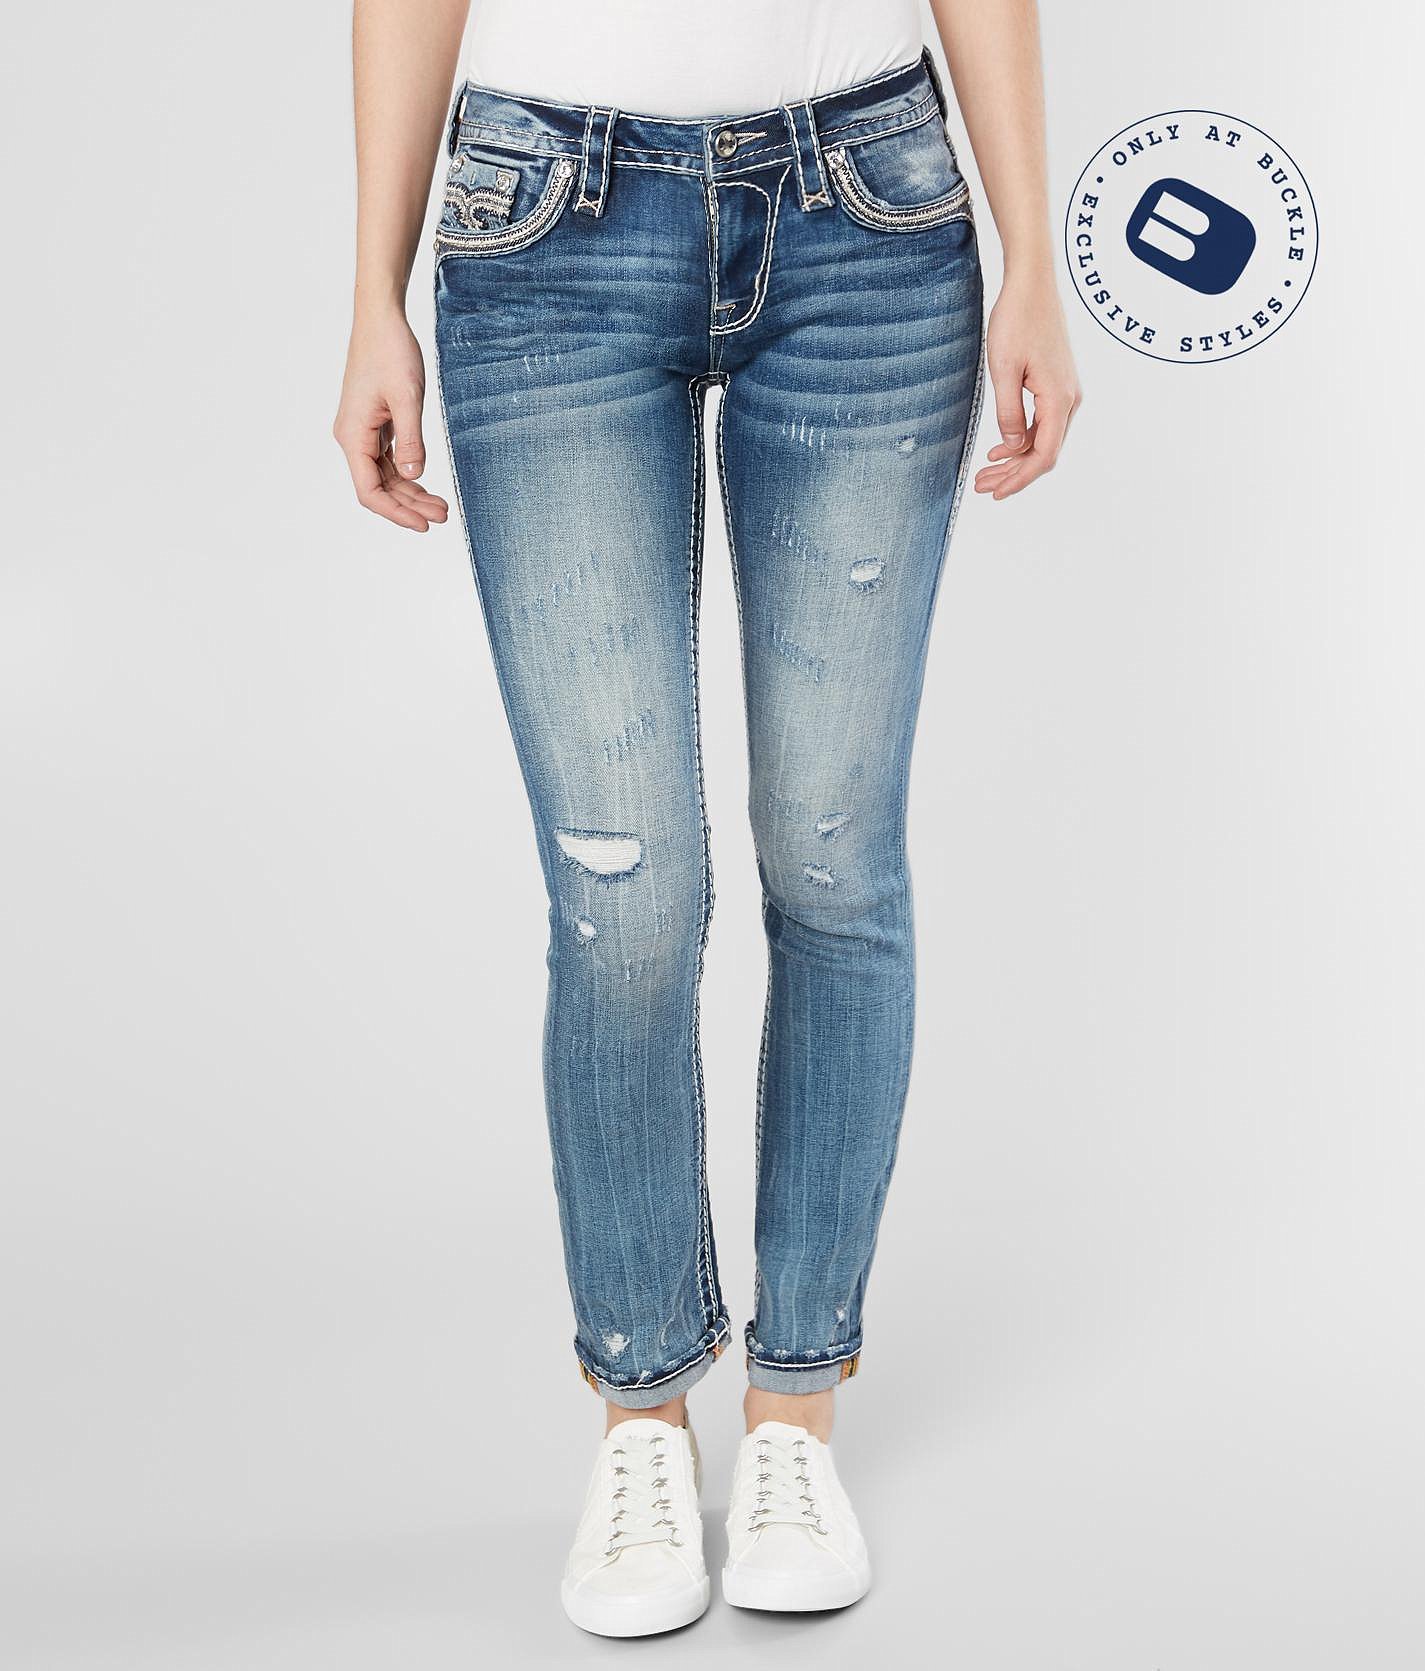 cuffed jeans for ladies